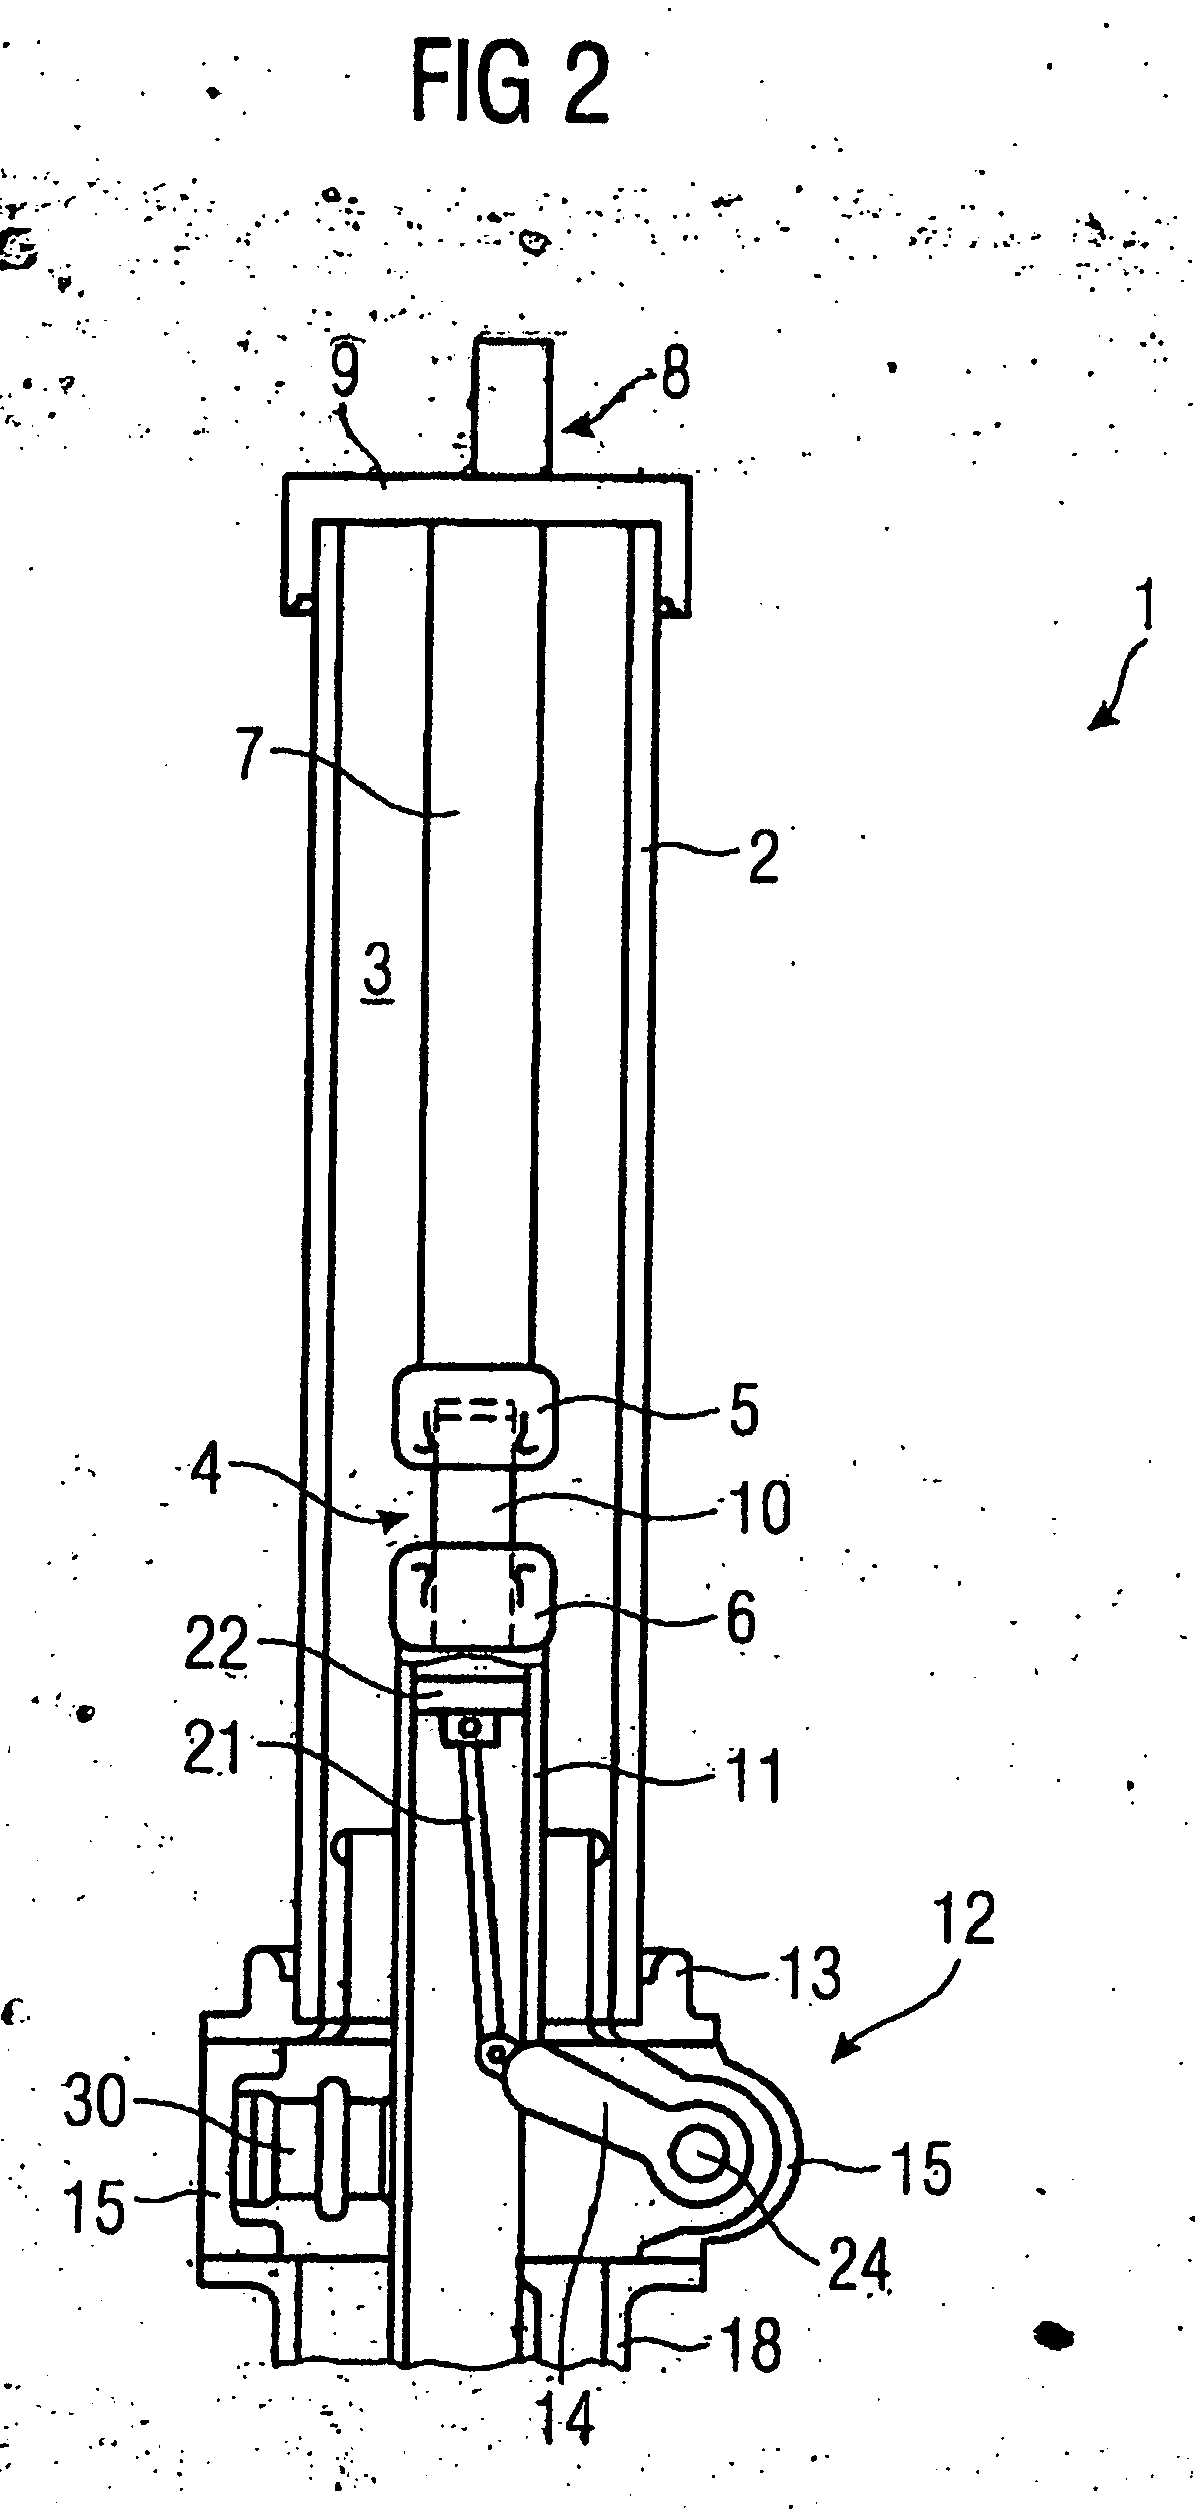 Outdoor bushing comprising an integrated disconnecting switch